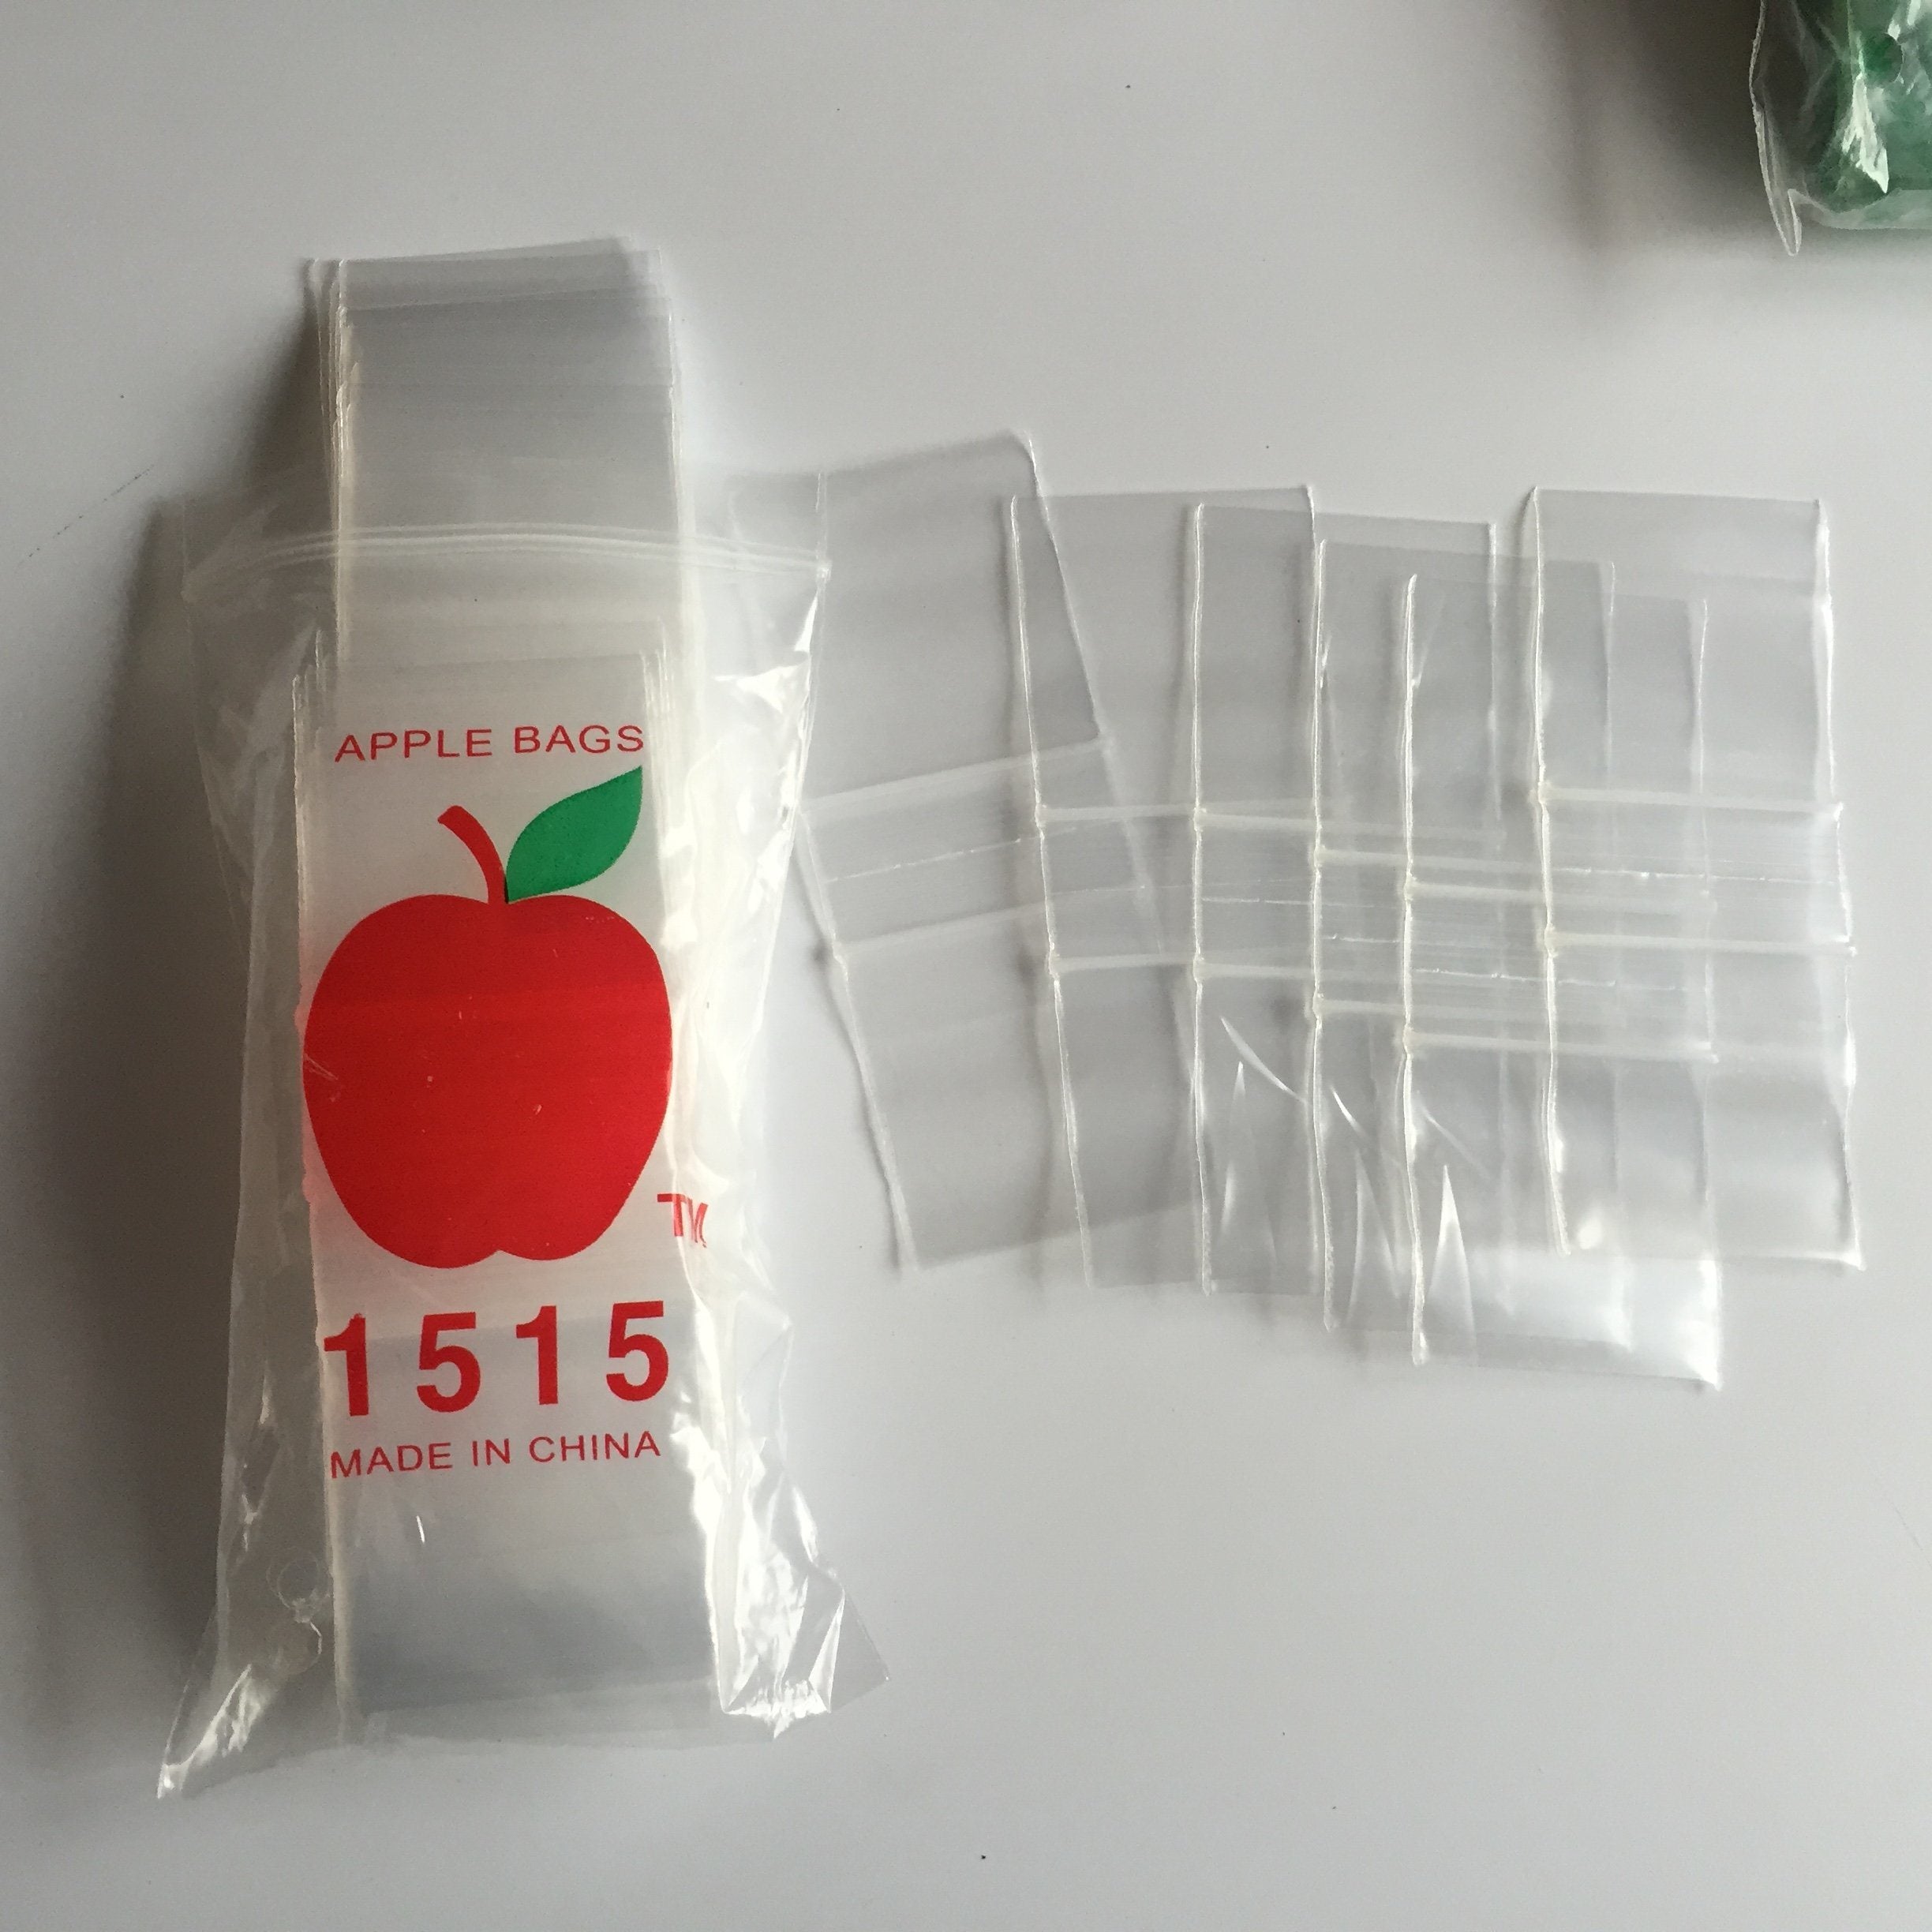 APPLE BAGS 1 1/2" X 1 1/2" 1000 COUNT